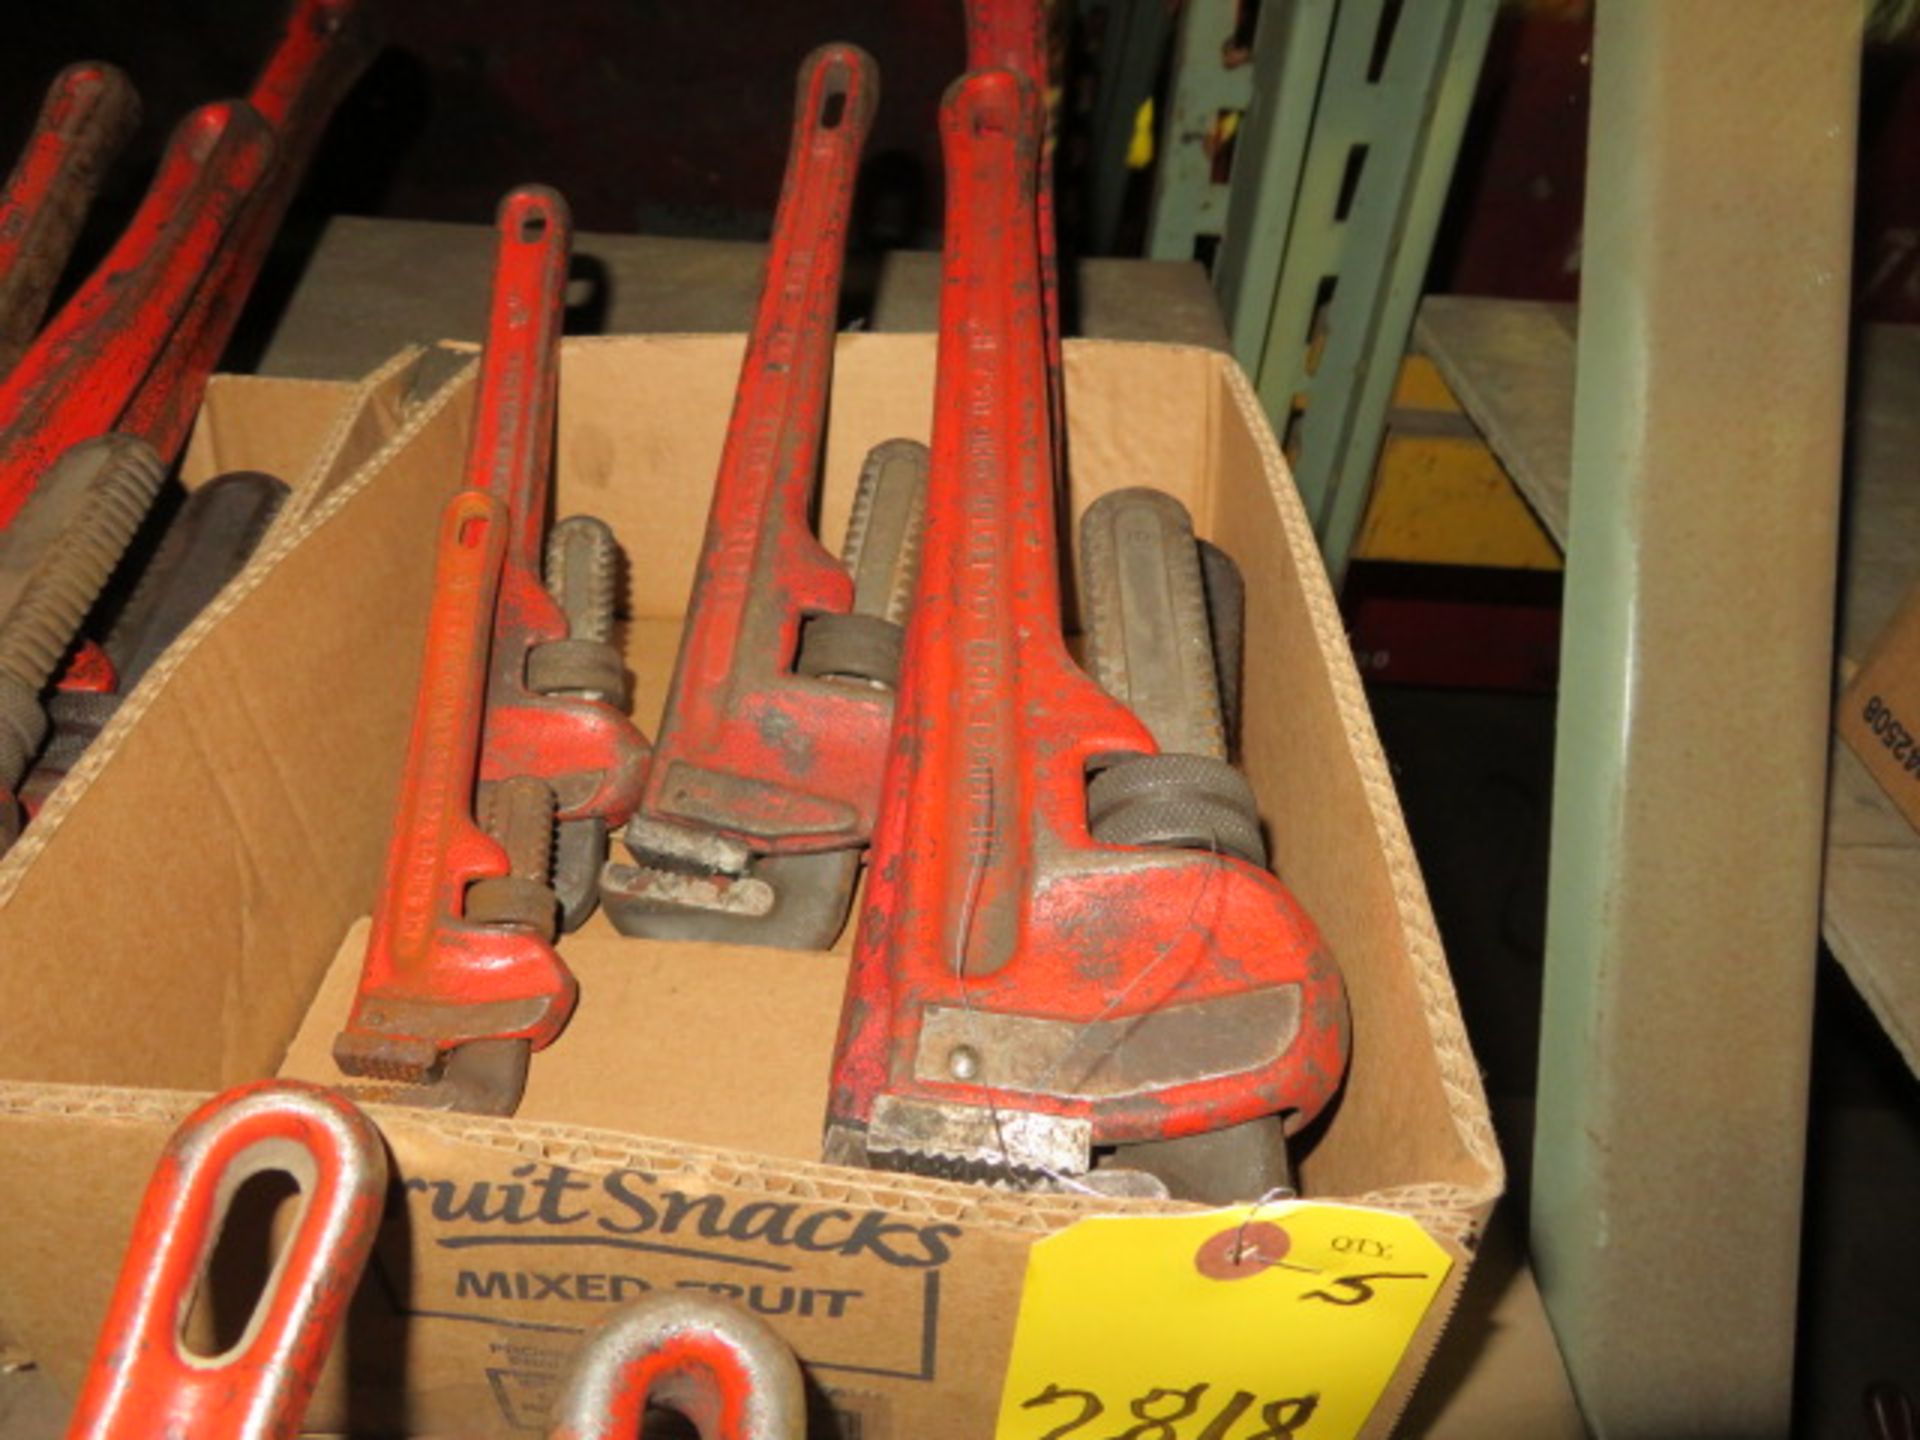 5- RIGID STEEL PIPE WRENCHES, 8" - 24"